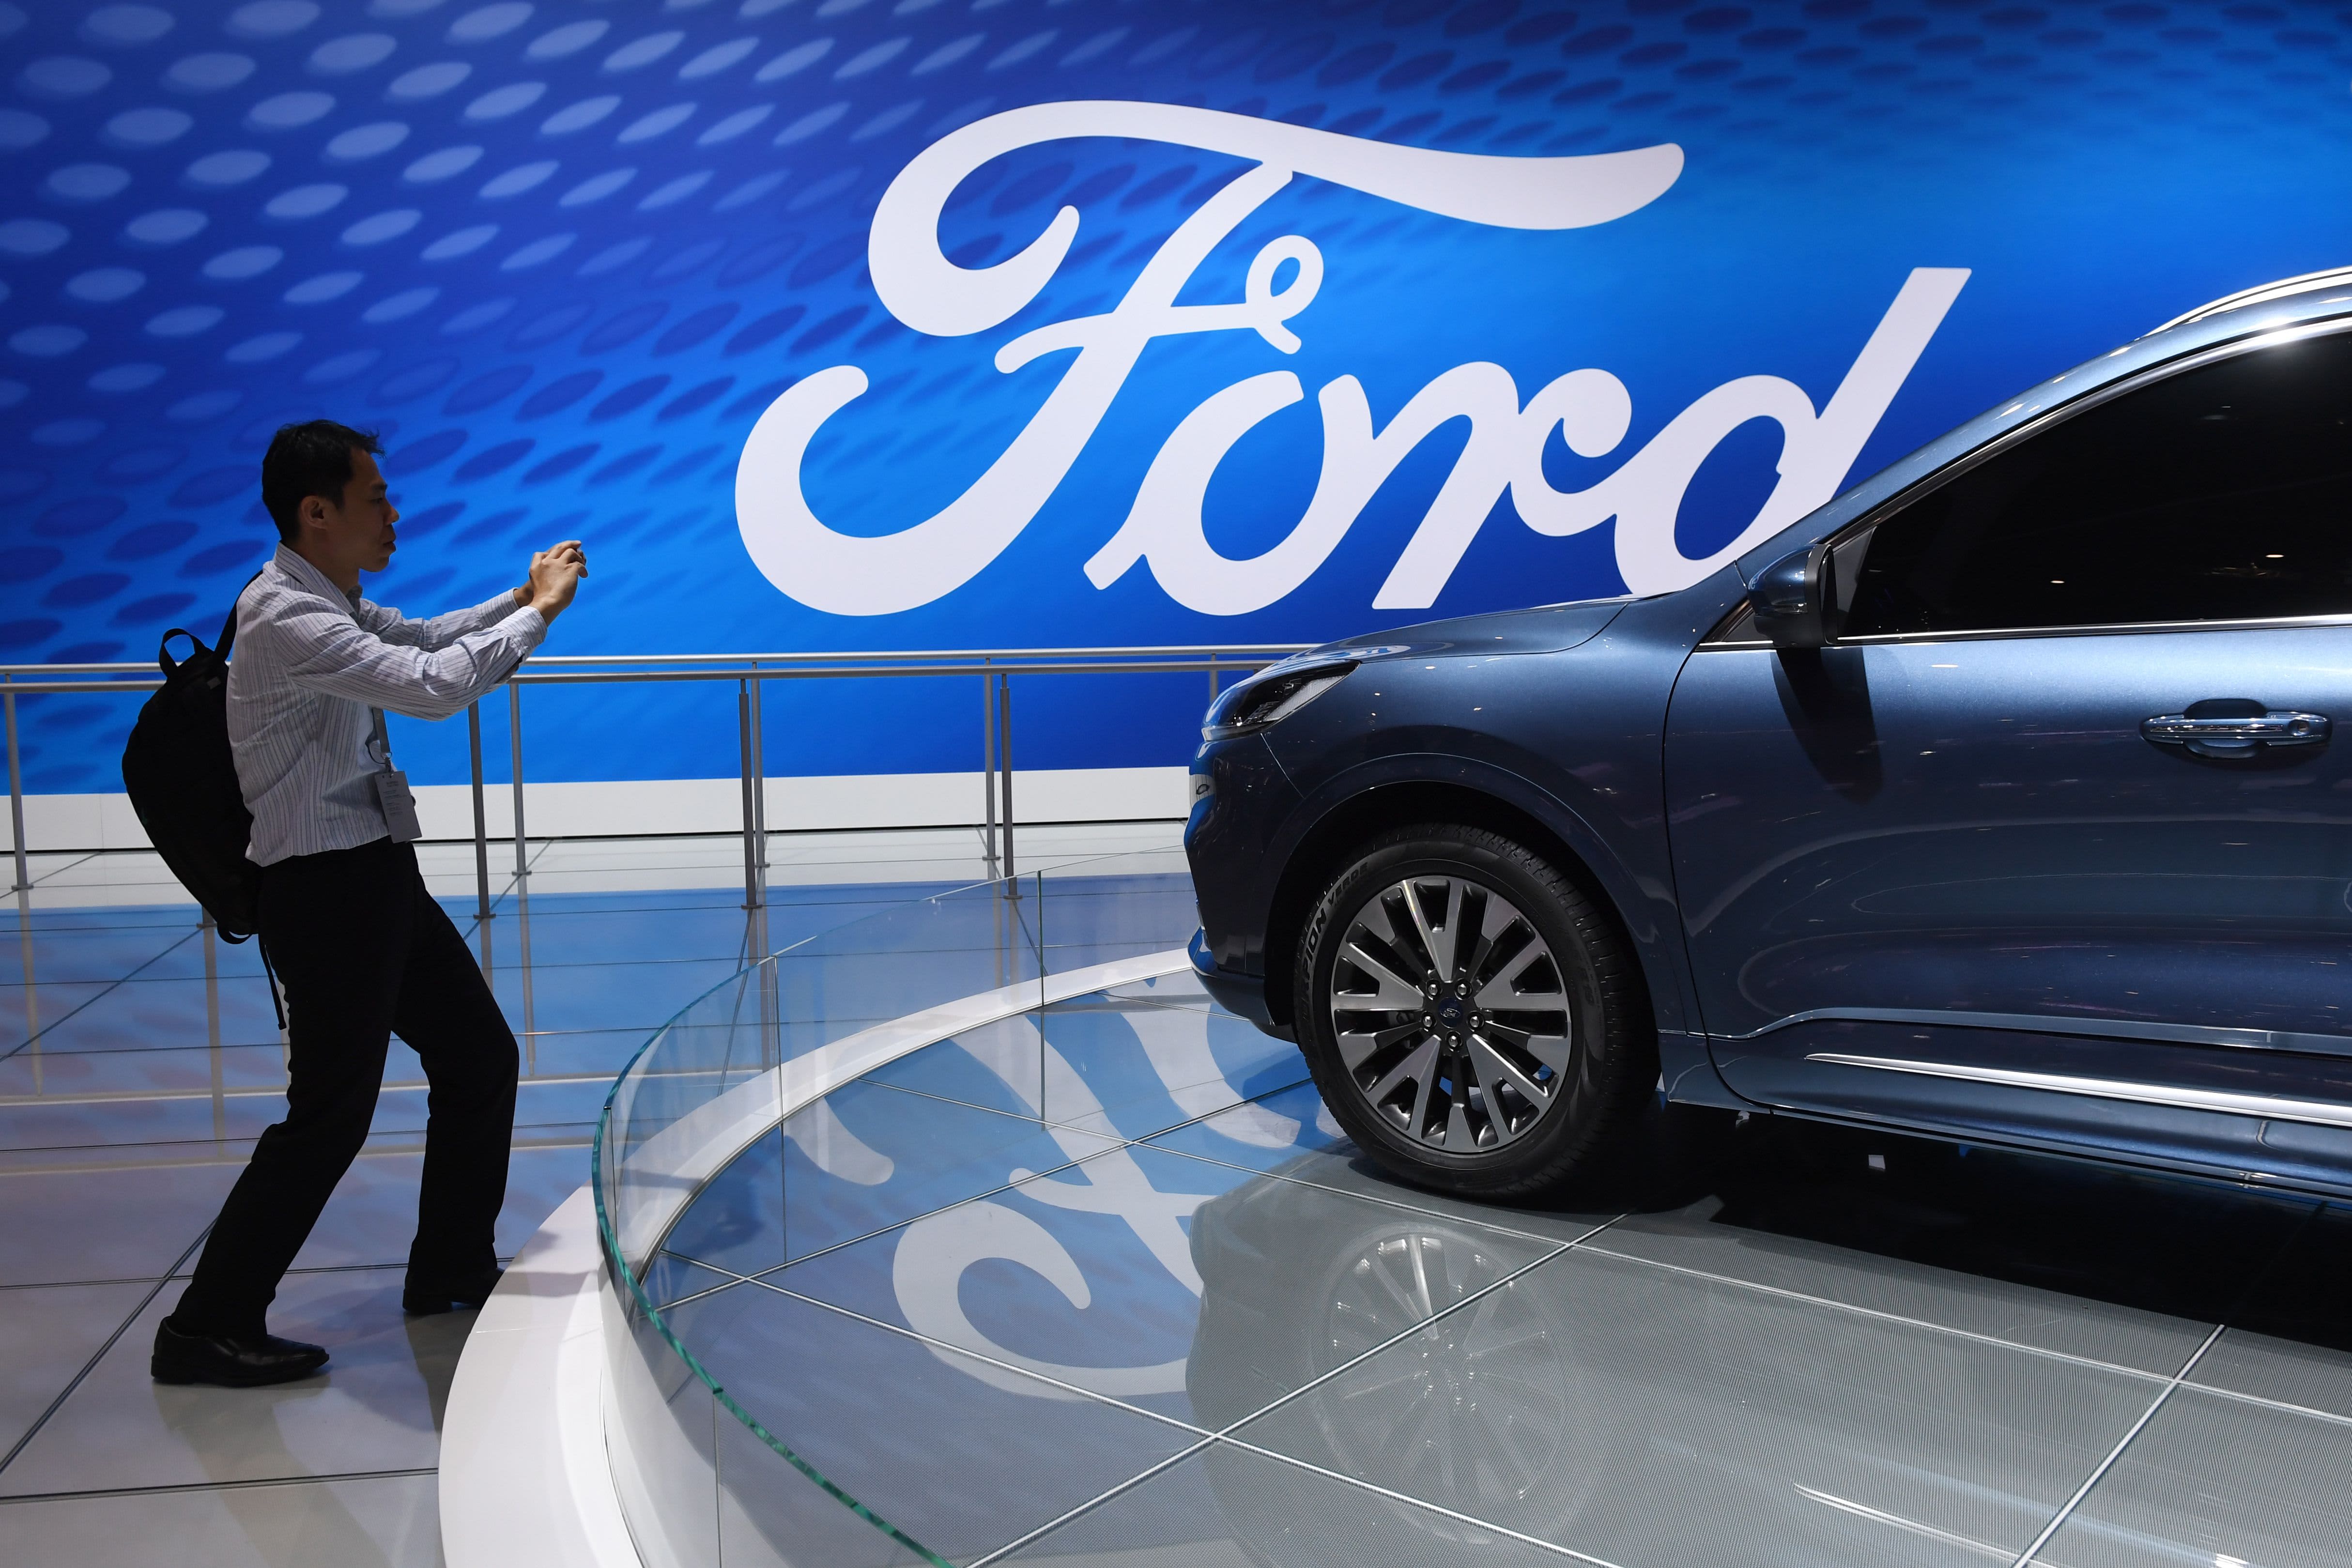 Ford shatters Wall Street’s earnings expectations, raises guidance for the year on new vehicle demand